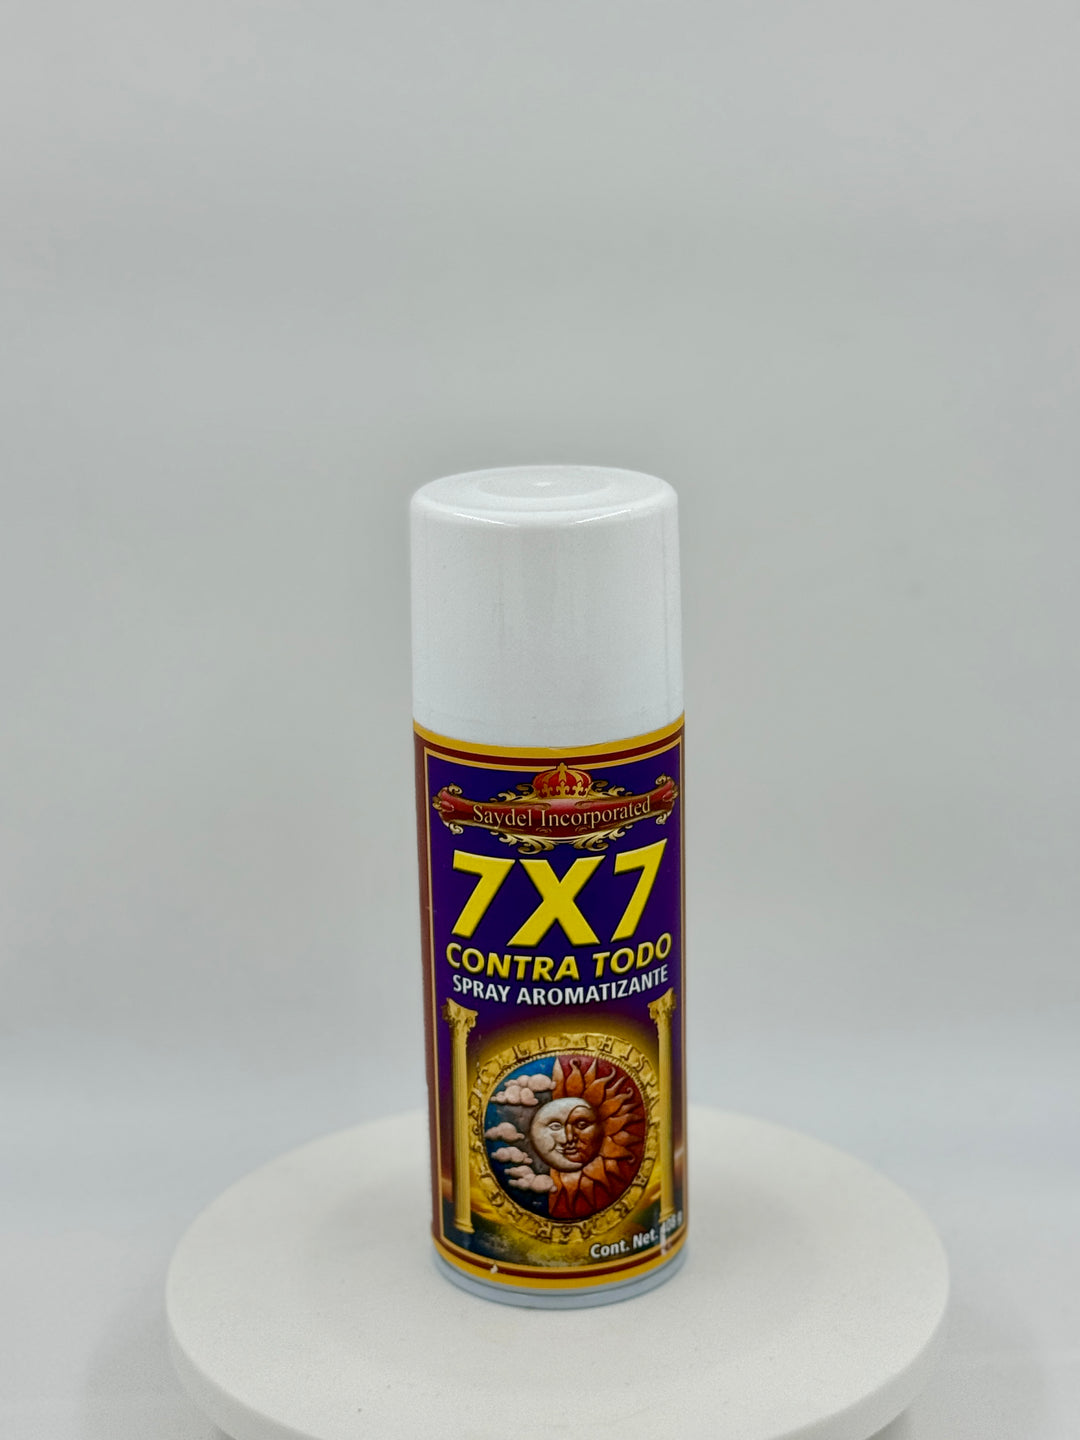 7X7 AGAINST ALL (7X7 CONTRA TODO) -Aromatic Spray